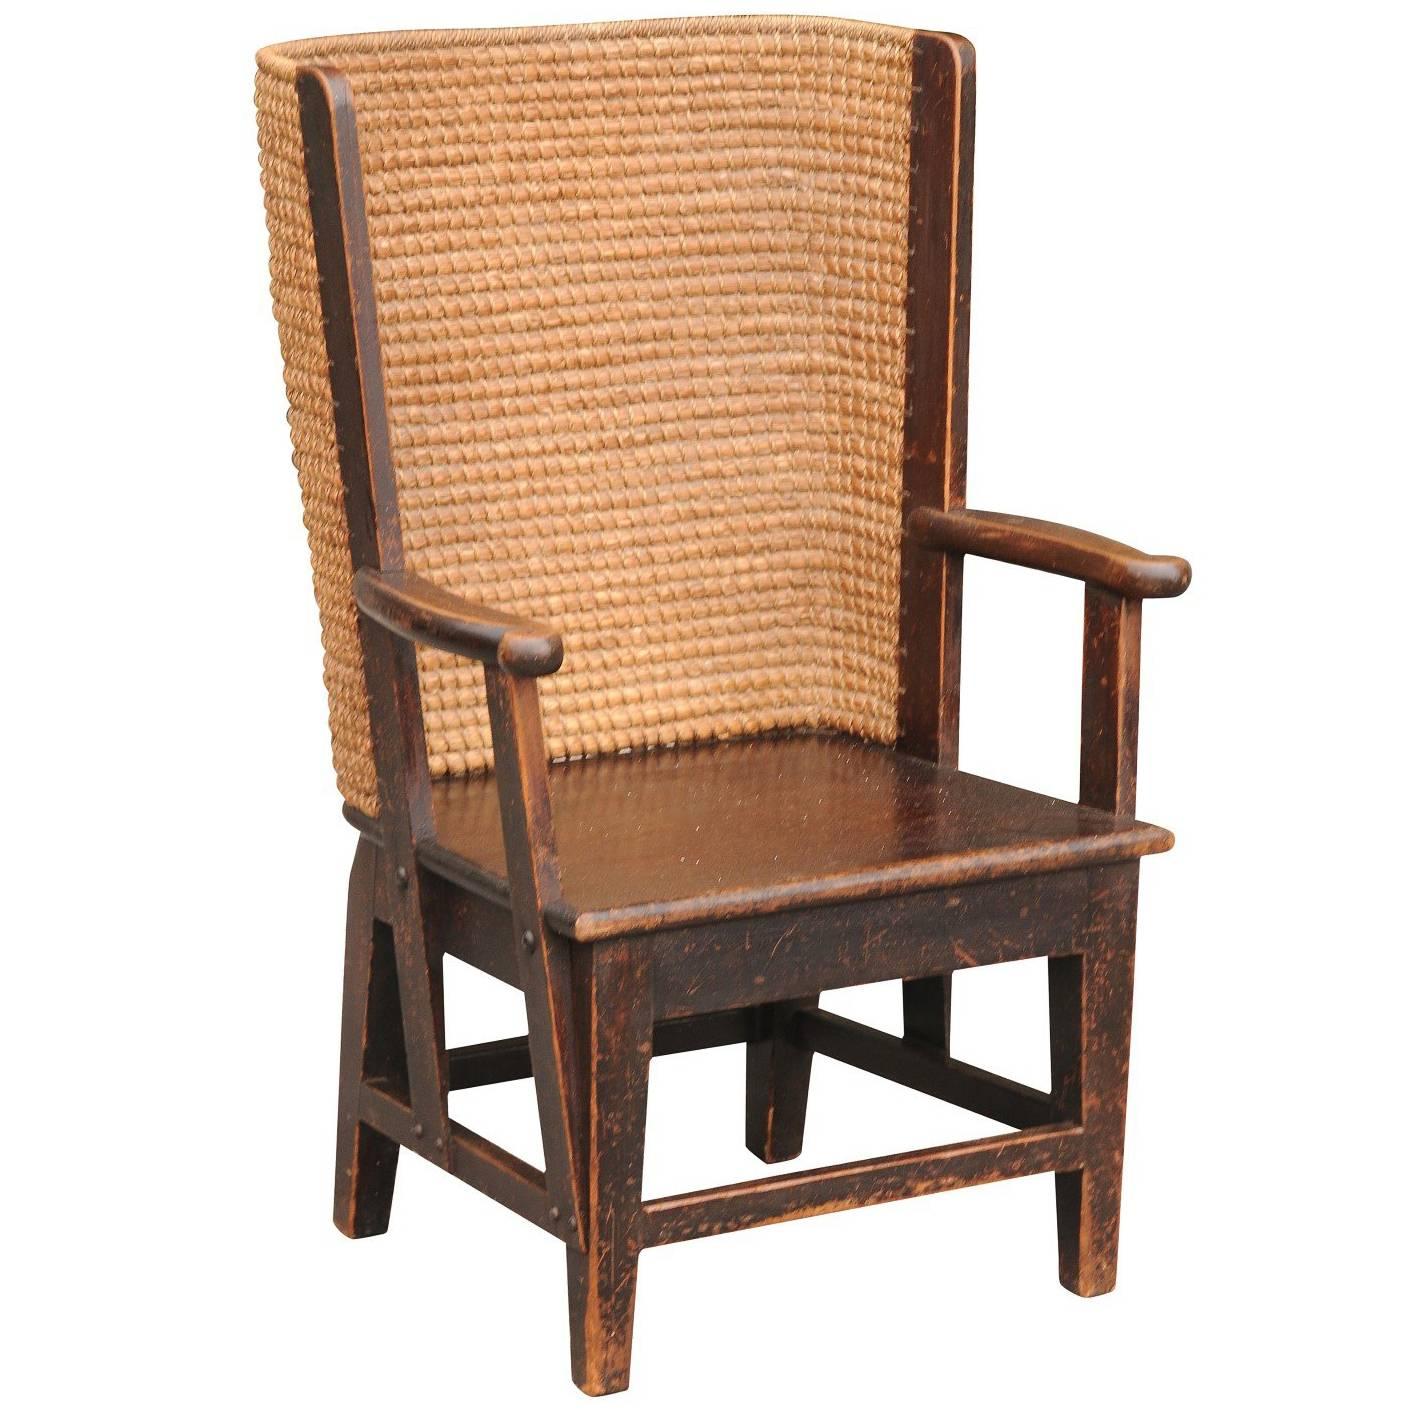 Antique Scottish Mid-19th Century Orkney Chair with Handwoven Straw Back